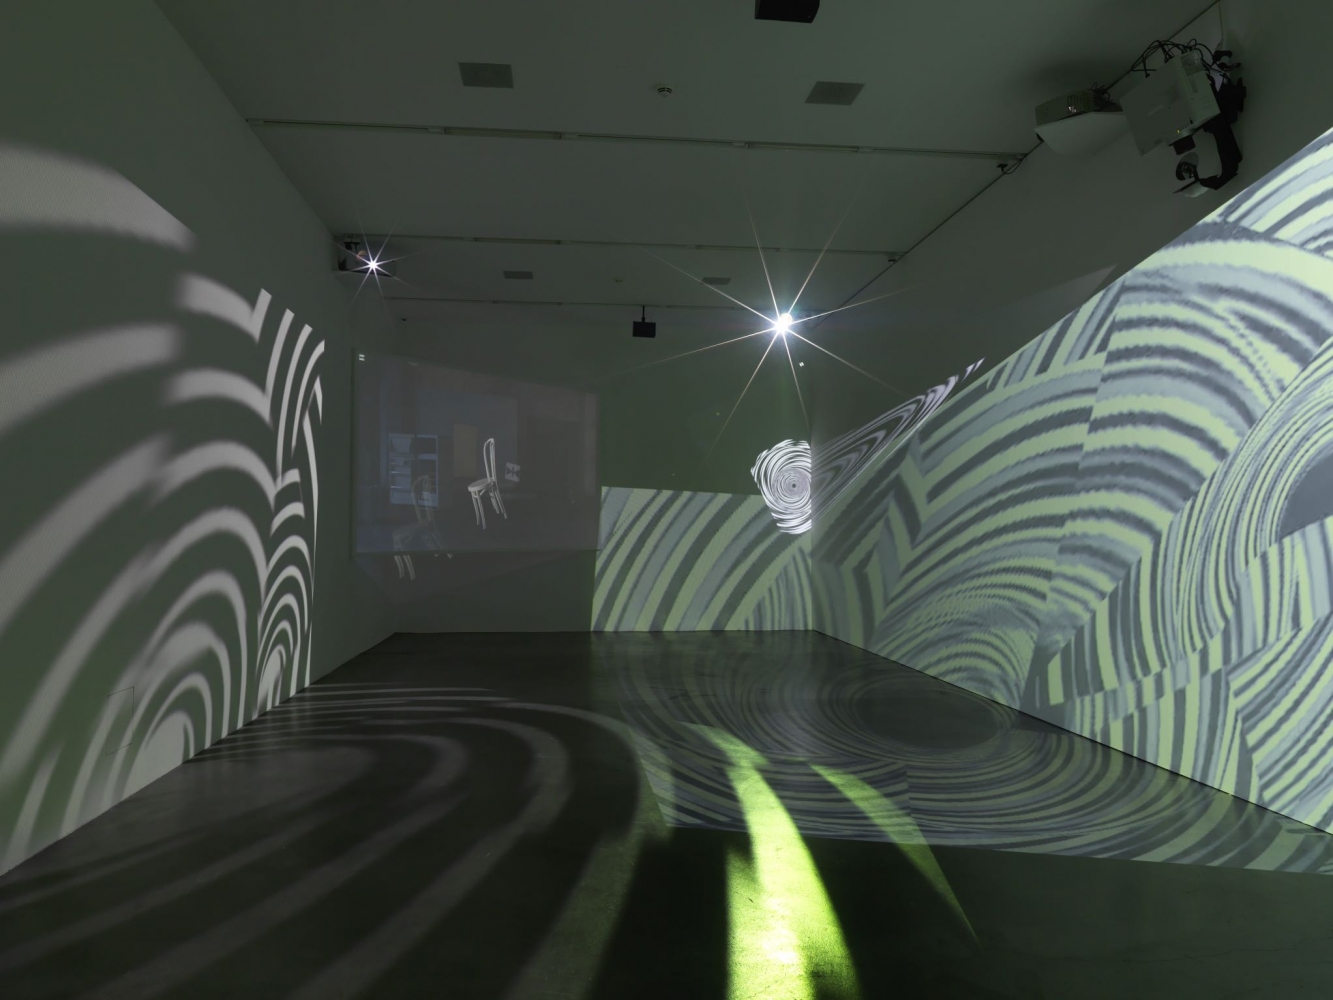 Charles Atlas, Institute for Turbulence Research, 2008